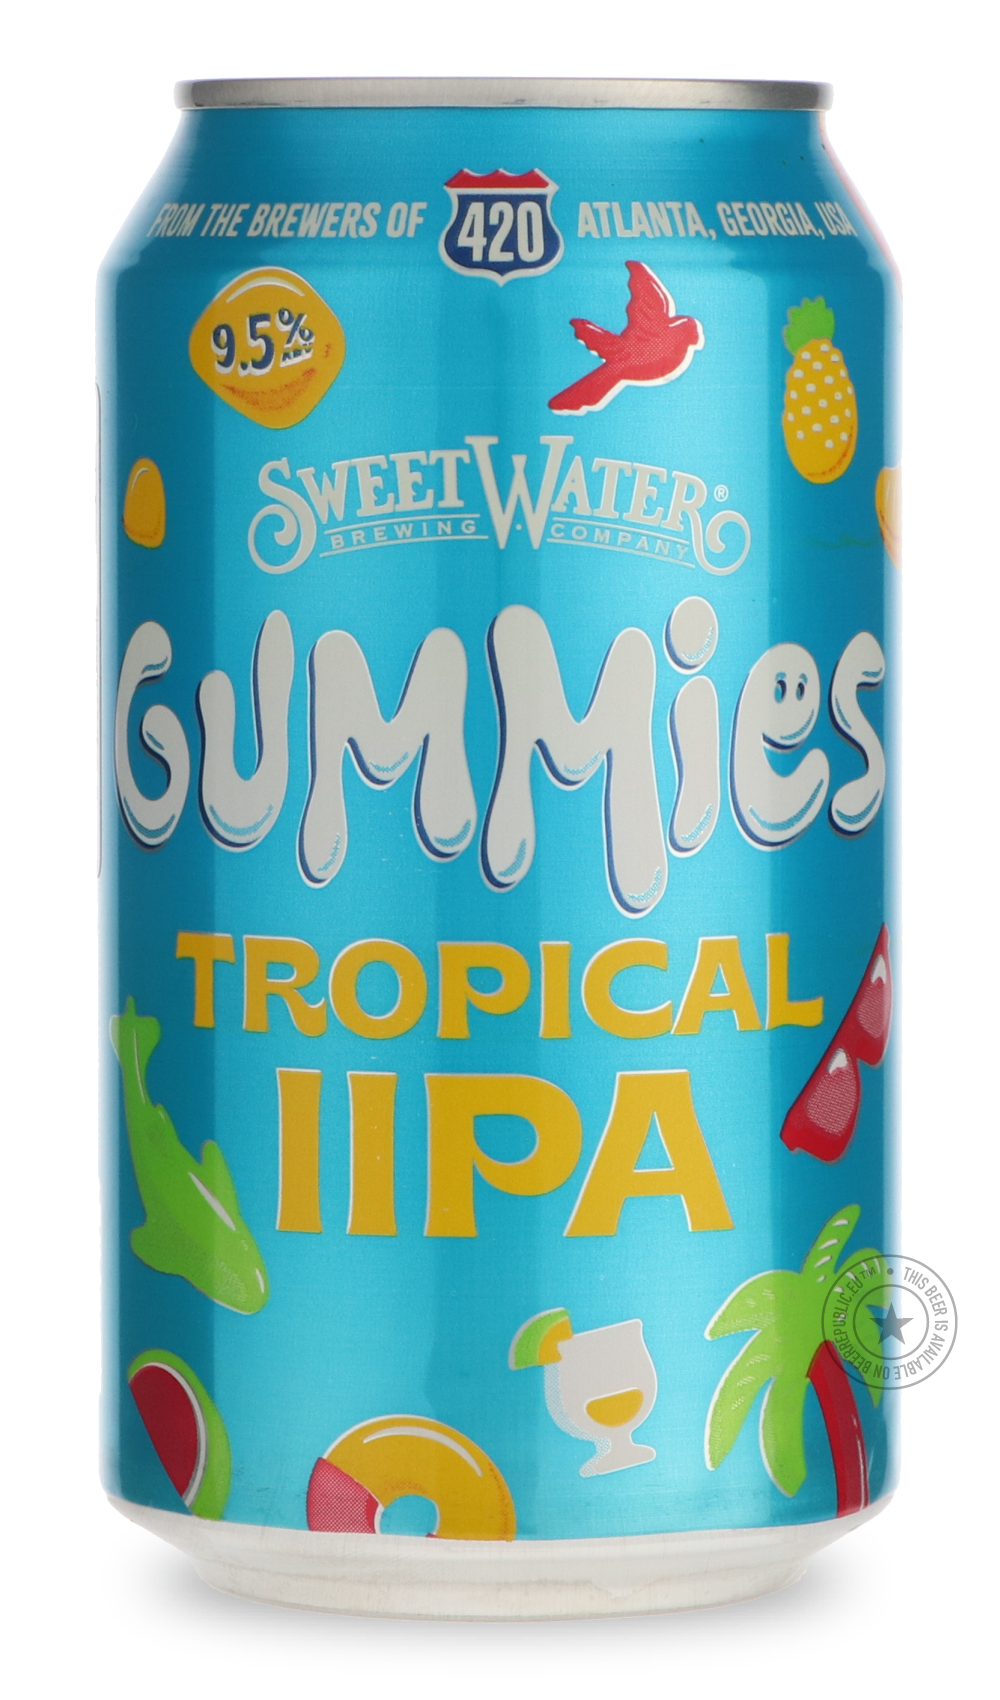 -SweetWater- Gummies Tropical-IPA- Only @ Beer Republic - The best online beer store for American & Canadian craft beer - Buy beer online from the USA and Canada - Bier online kopen - Amerikaans bier kopen - Craft beer store - Craft beer kopen - Amerikanisch bier kaufen - Bier online kaufen - Acheter biere online - IPA - Stout - Porter - New England IPA - Hazy IPA - Imperial Stout - Barrel Aged - Barrel Aged Imperial Stout - Brown - Dark beer - Blond - Blonde - Pilsner - Lager - Wheat - Weizen - Amber - Bar